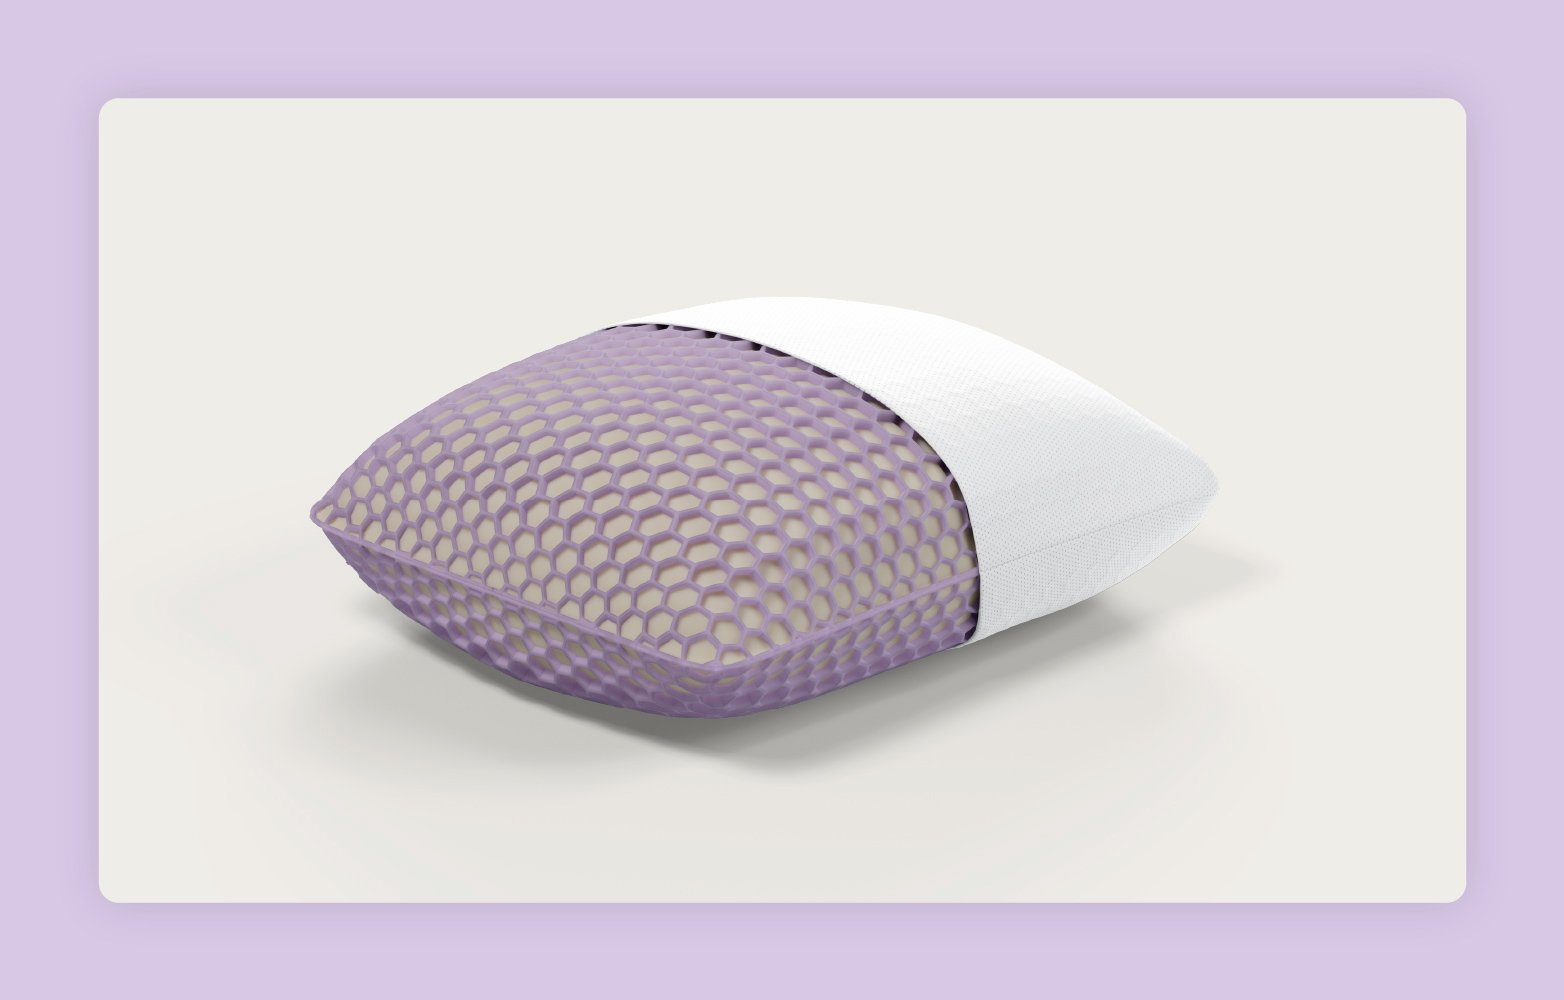 The Purple Harmony™ Anywhere Pillow partially showing the honeycomb GelFlex® Grid.